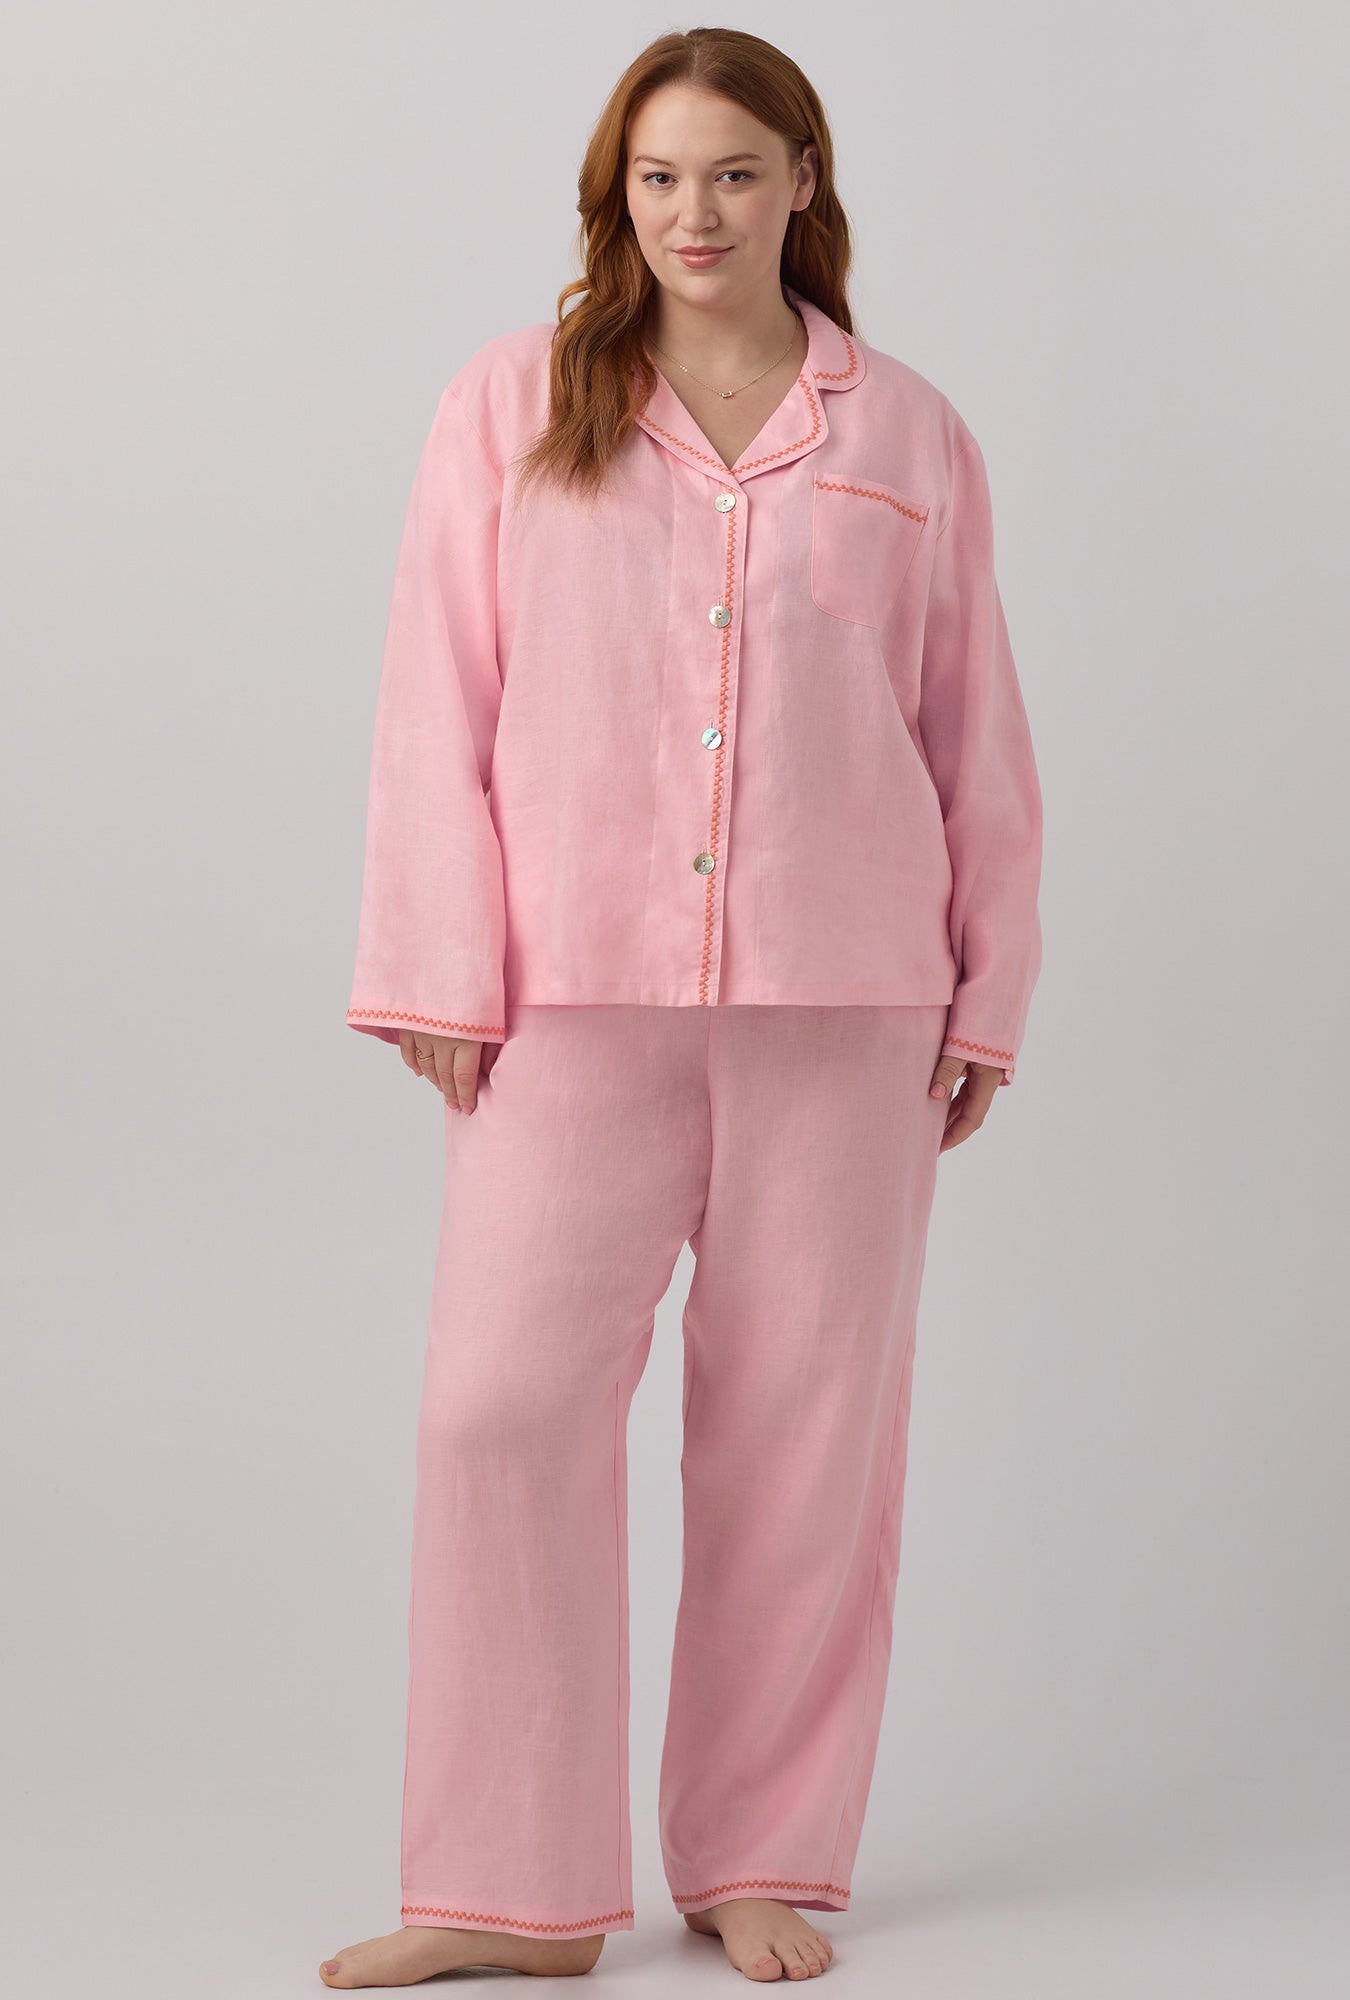 A lady wearing pink Long Sleeve Classic Linen PJ Set with Orchid Pink print.